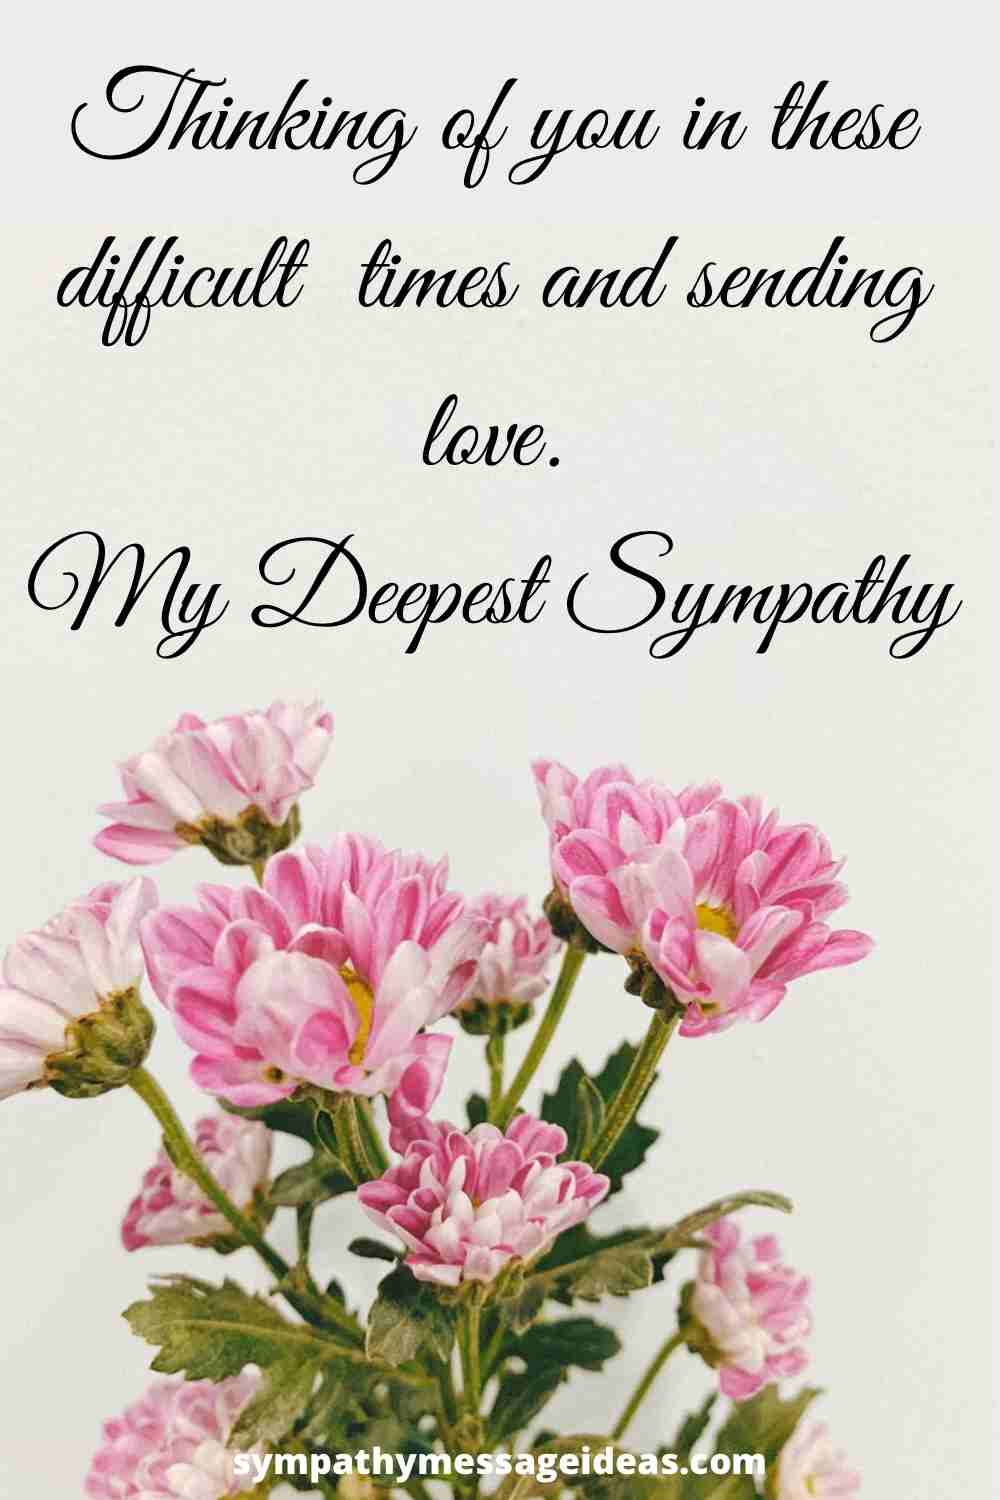 sympathy message to someone who lost a loved one